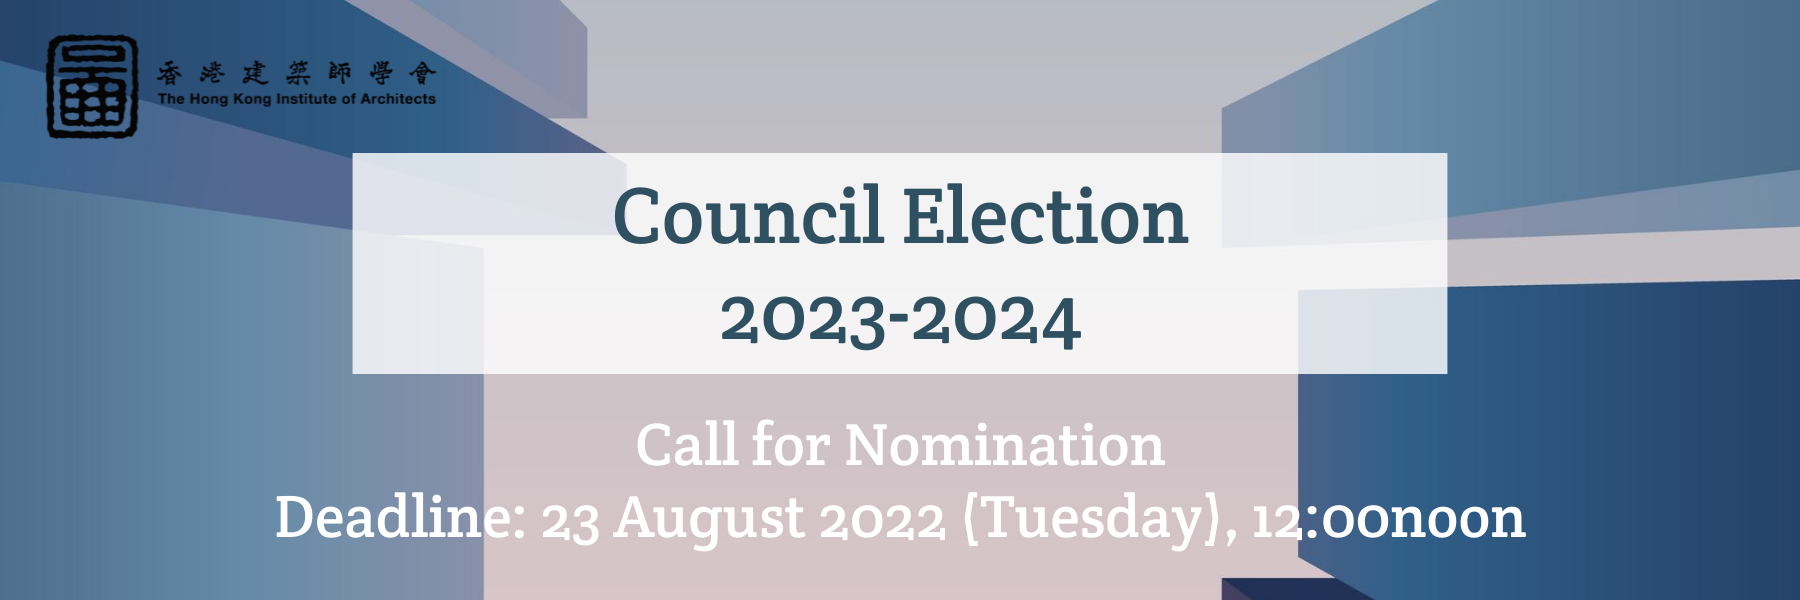 Council Election 2023-2024: Call for Nomination